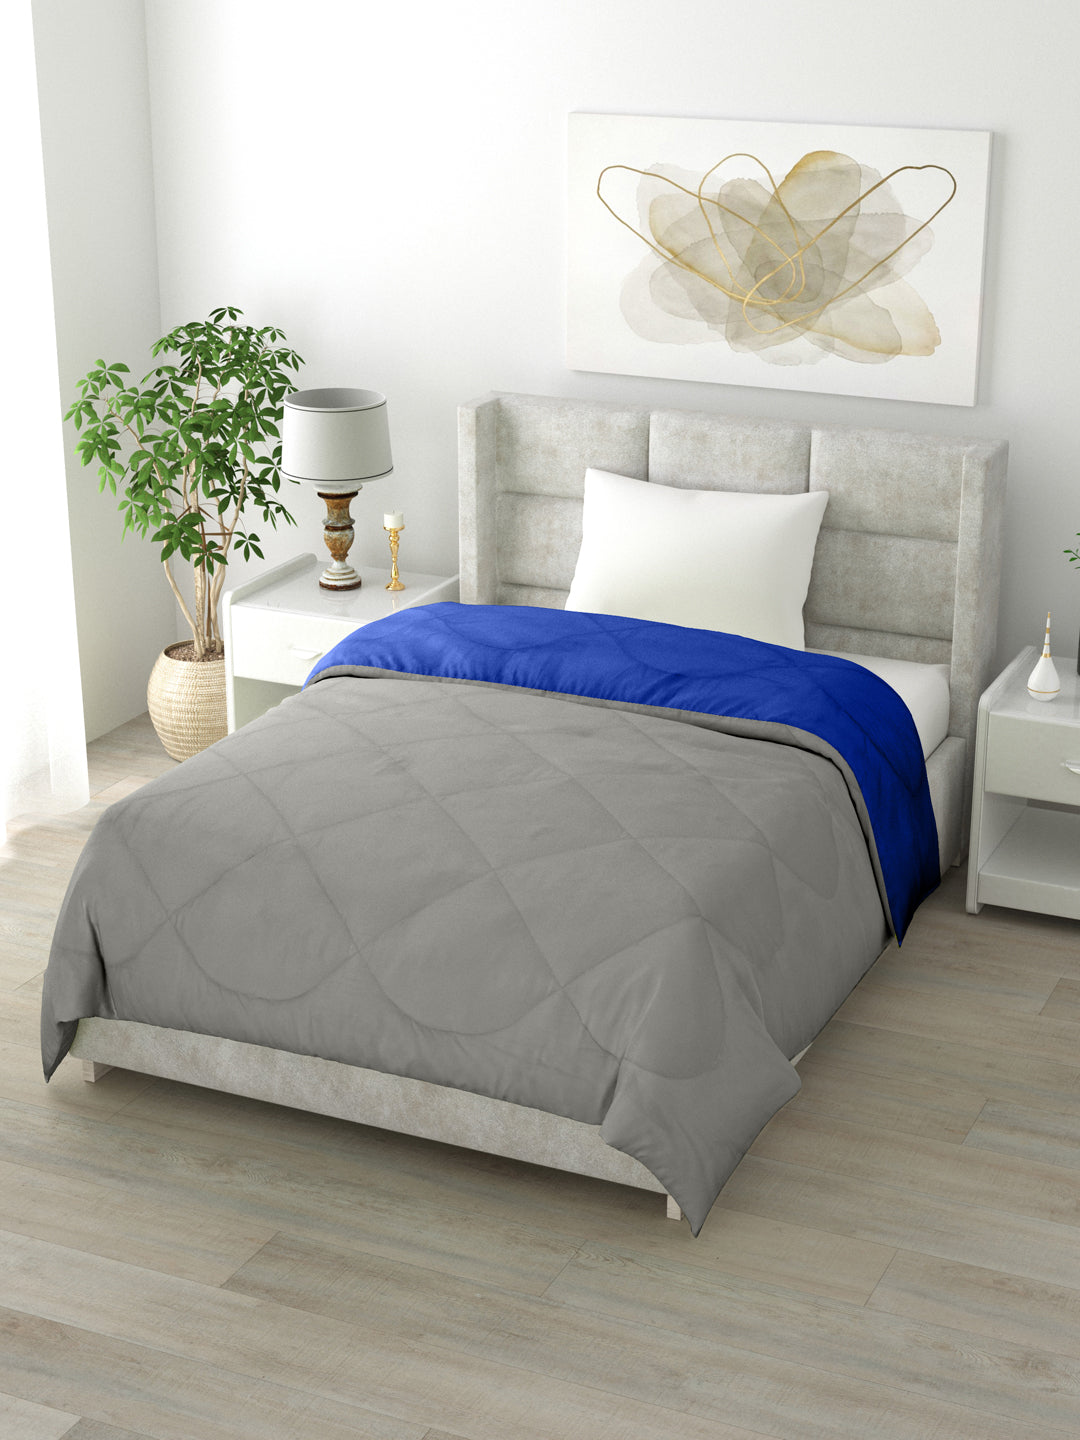 Reversible Single Bed Comforter 200 GSM 60x90 Inches (Grey & Blue)